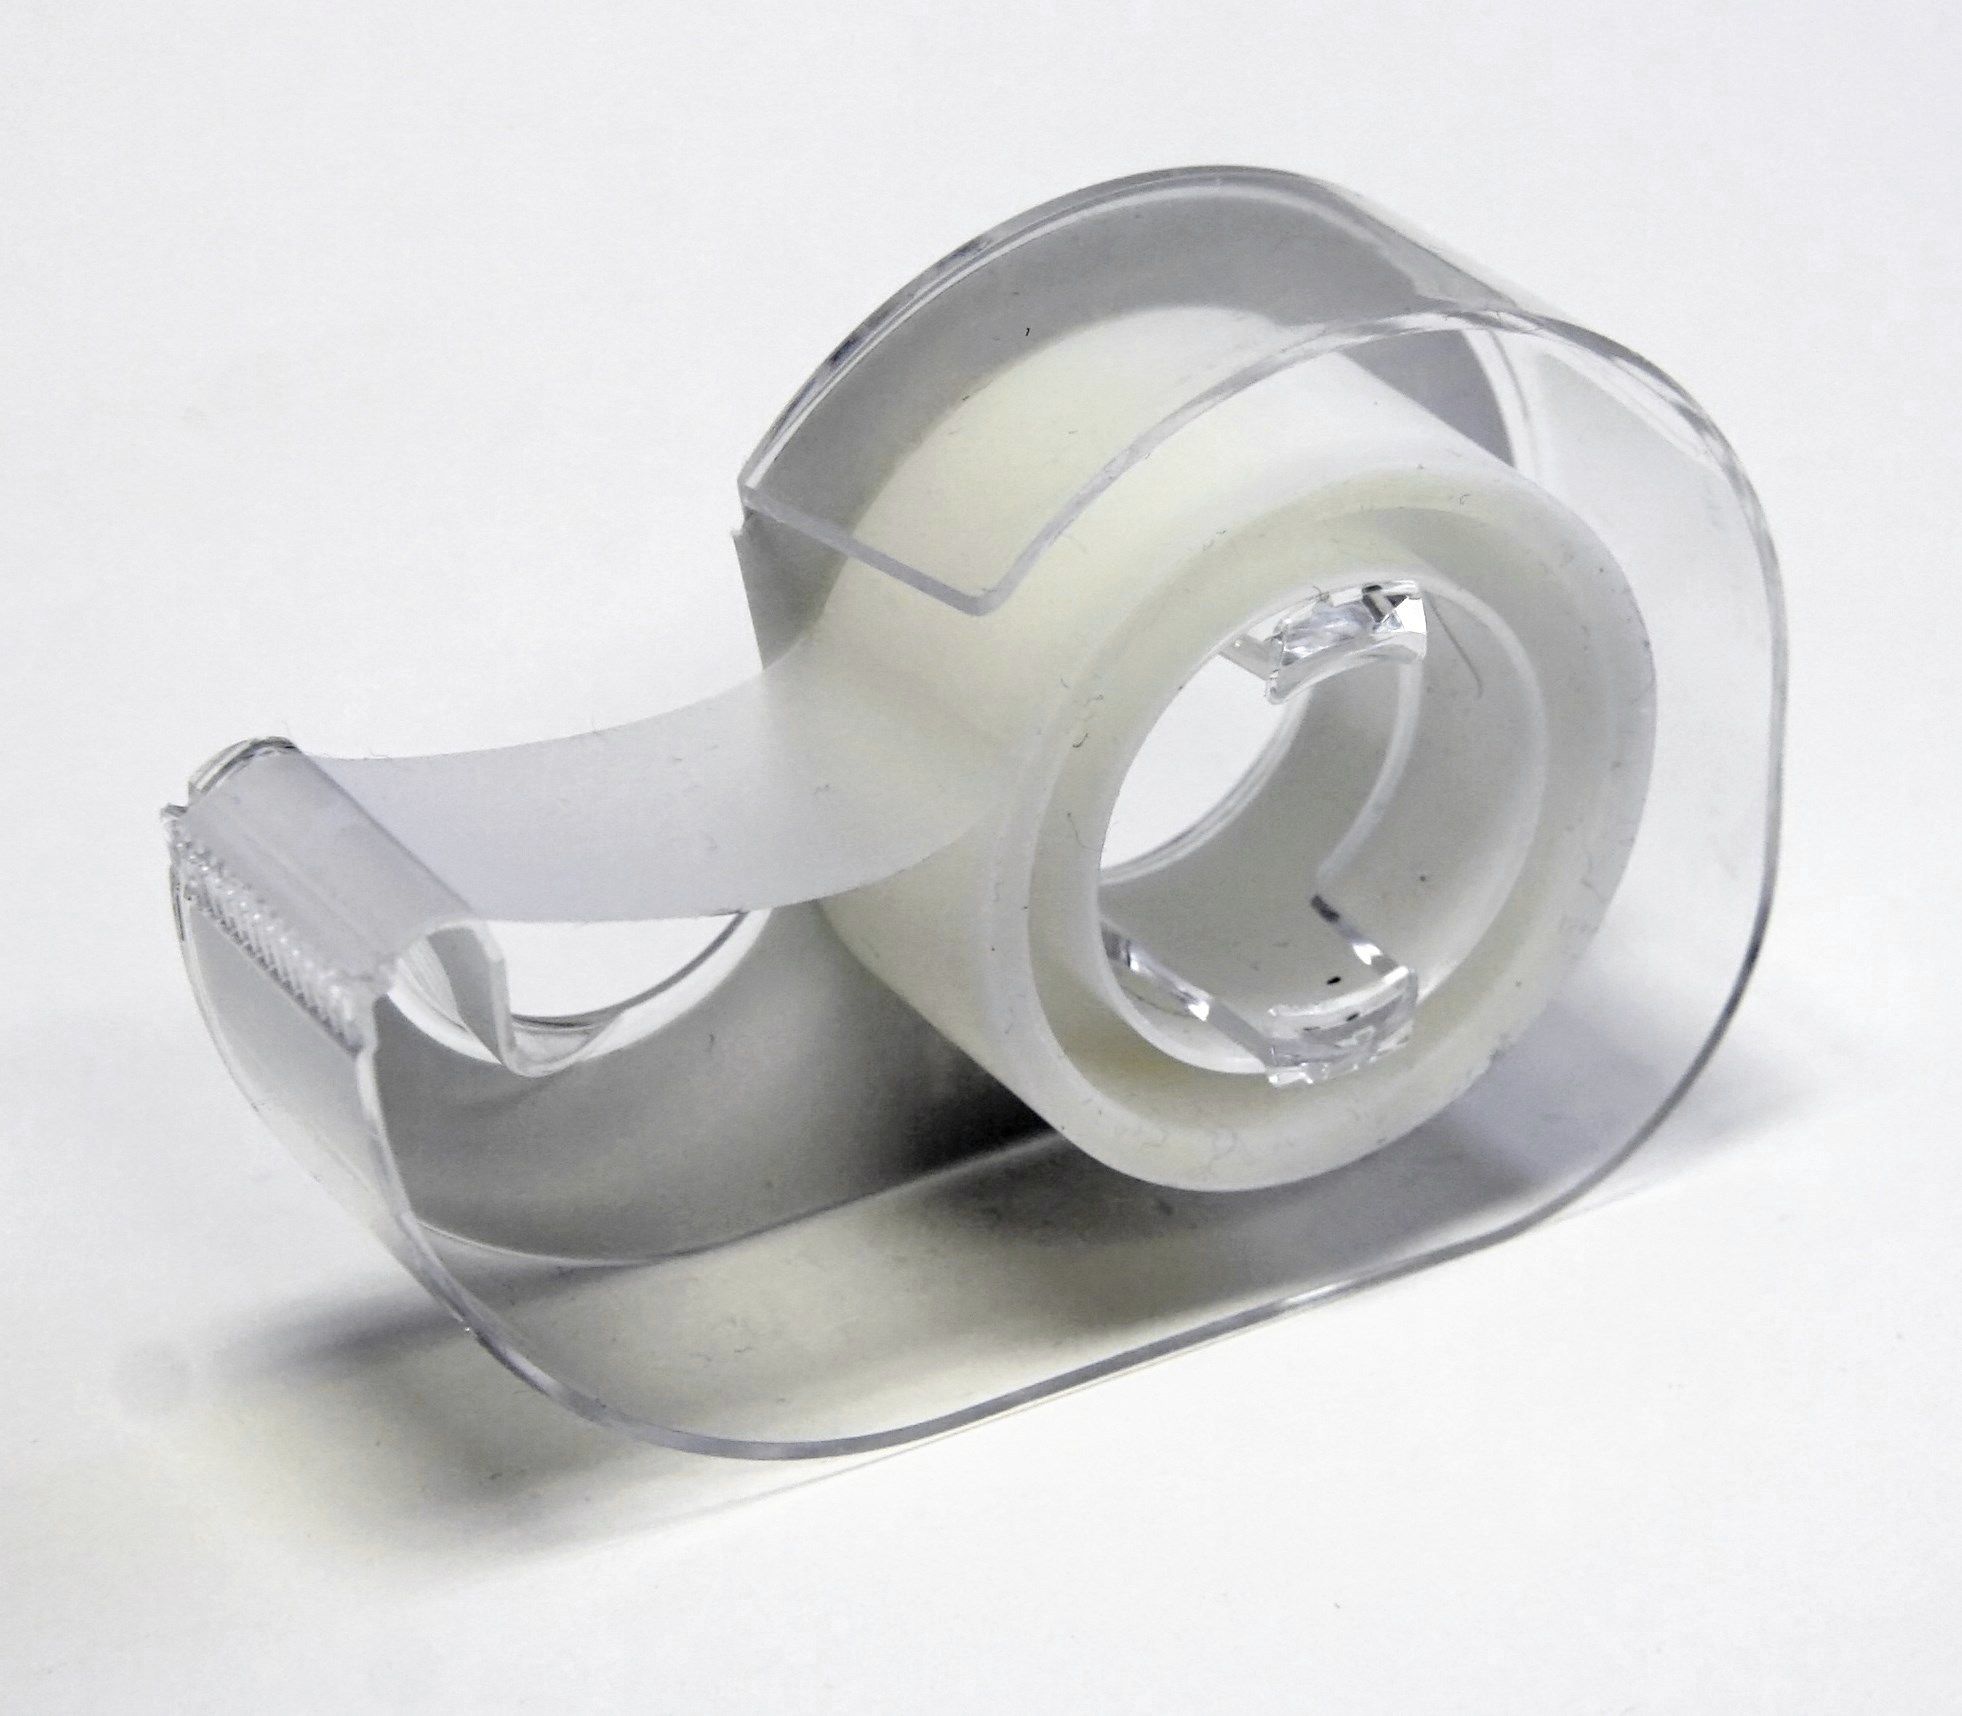 Market Research Report on Cloth Insulating Adhesive Tapes